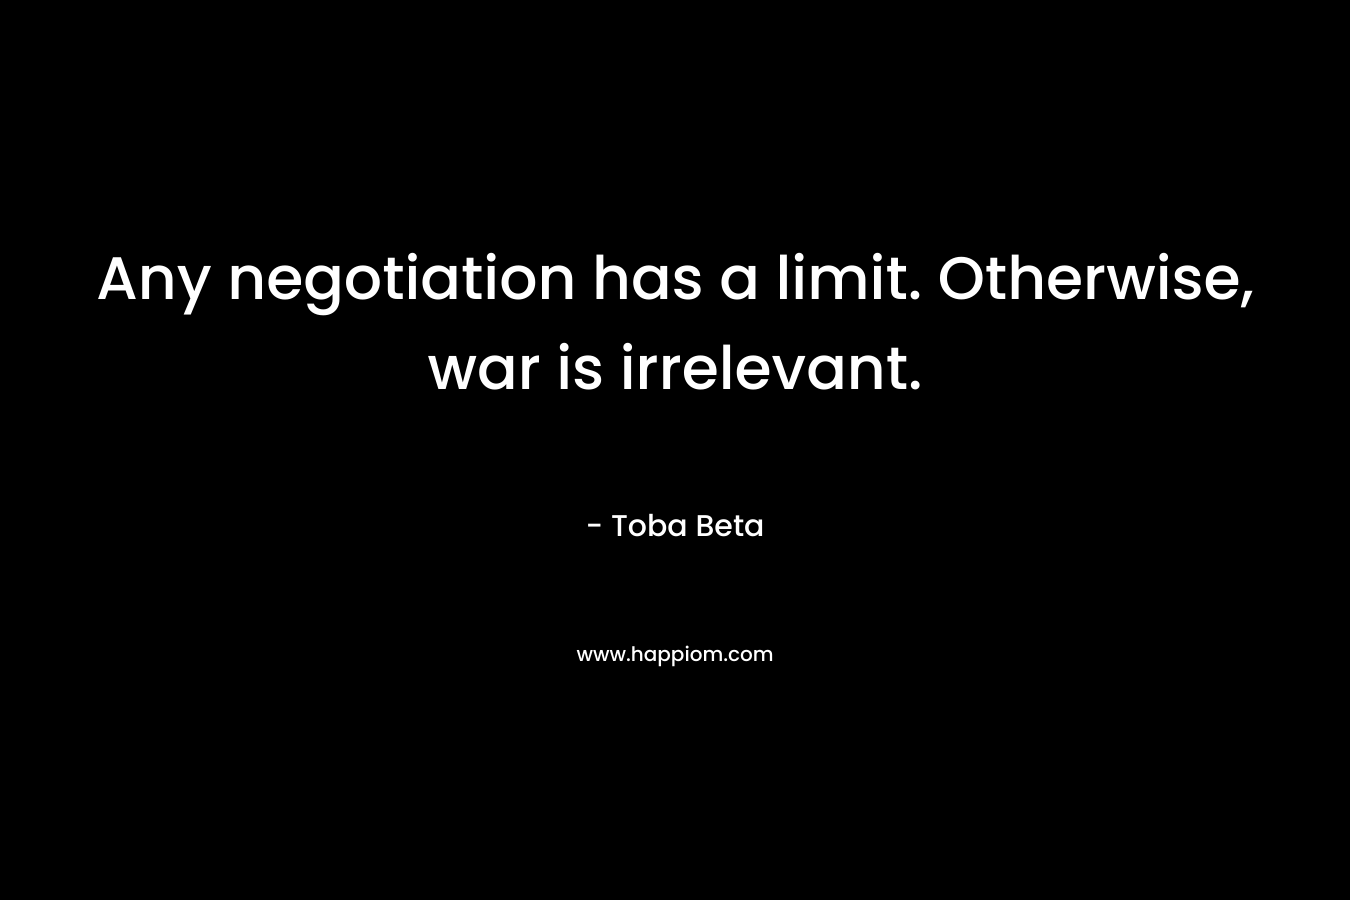 Any negotiation has a limit. Otherwise, war is irrelevant. – Toba Beta